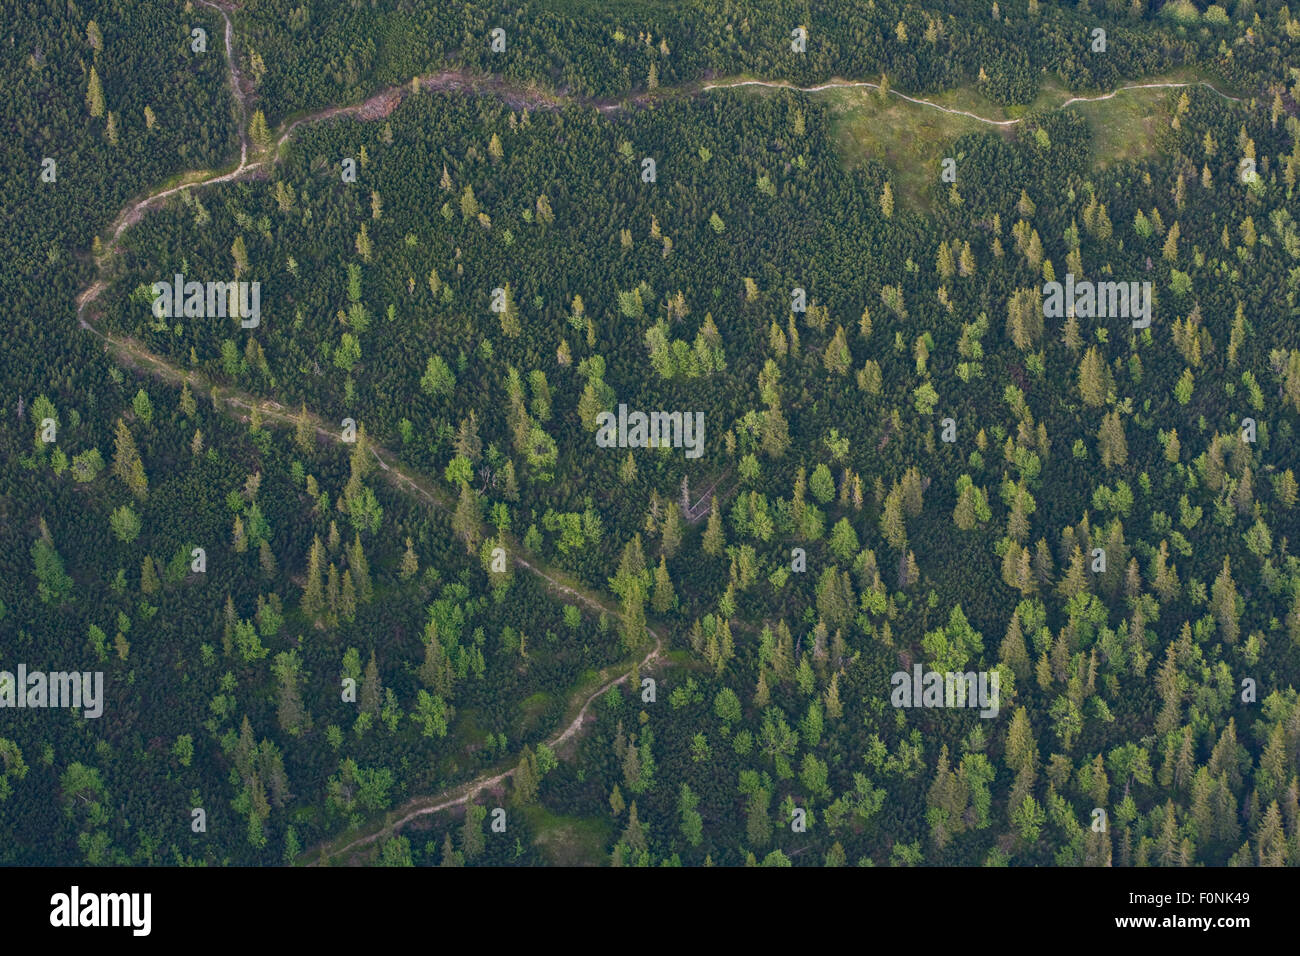 Aerial view of path in mountain forest of Norway spruce (Picea abies) Mountain ash / Rowan (Sorbus aucuparia) and the Dwarf mountain pine (Pinus mugo) zone, Western Tatras, Carpathian Mountains, Slovakia, June 2009 Stock Photo